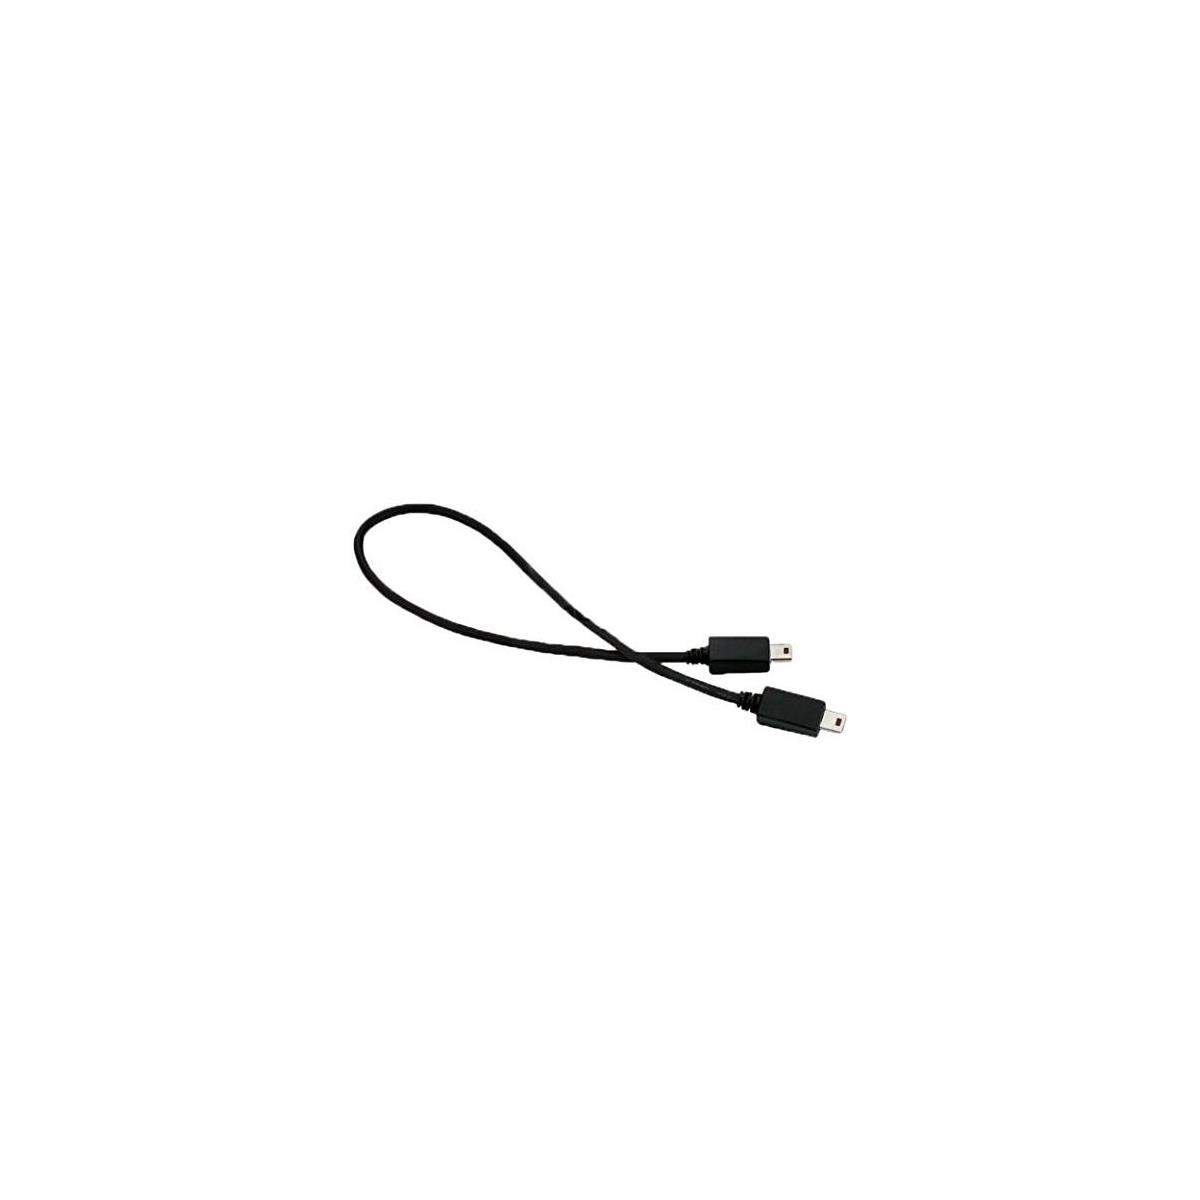 Image of Motorola RLN6303 Cloning Cable for RDX Series Two-Way Radios